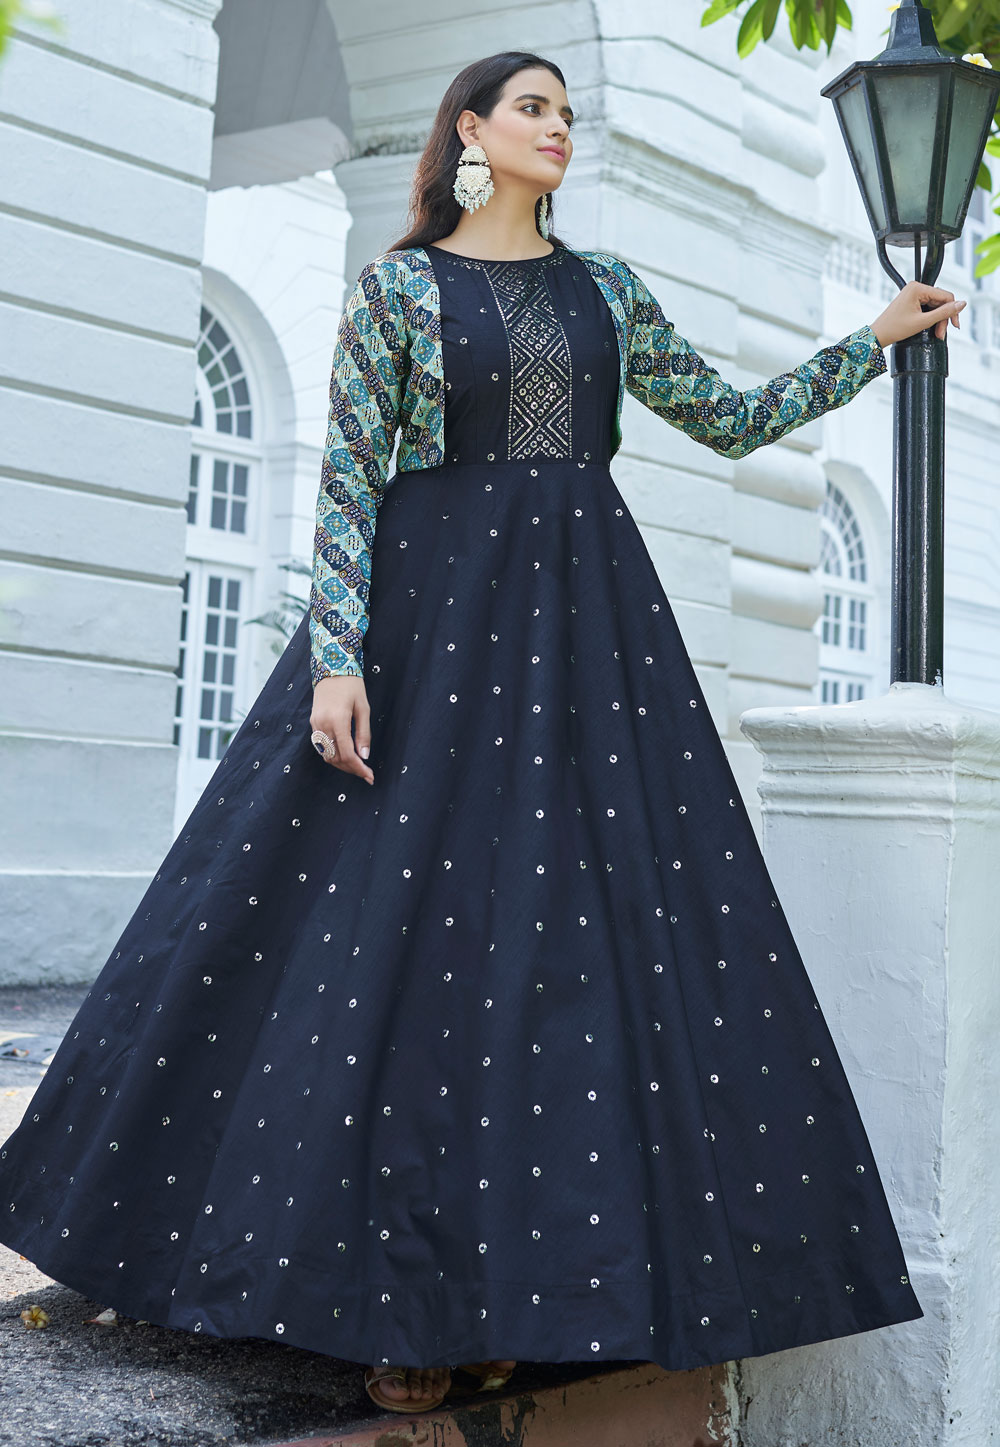 KHUSBHOO BAGRI presents Sehr Pale Blue Gown & Jacket exclusively available  at FEI